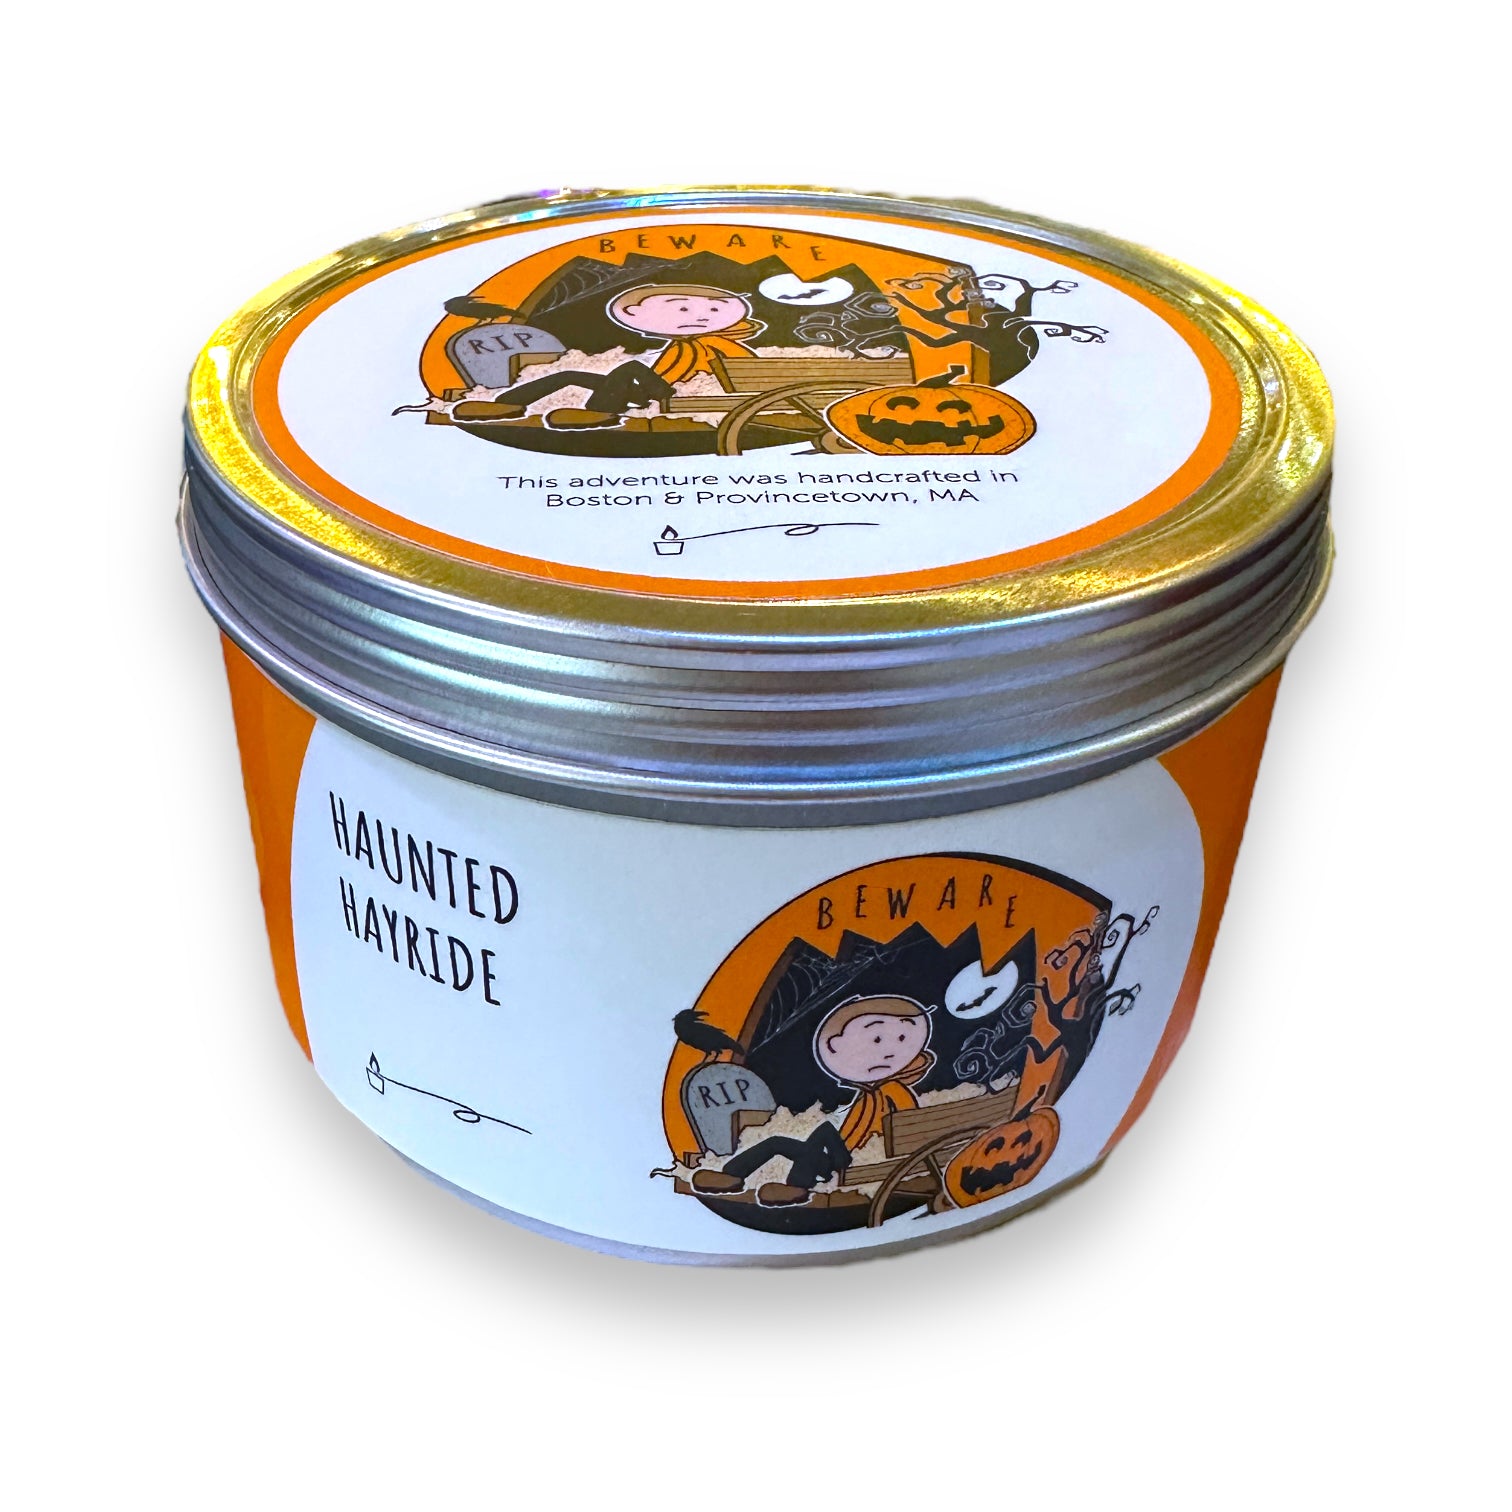 Something Wicked -Soy Crackling Wood Wick Candle – Mellow Monkey